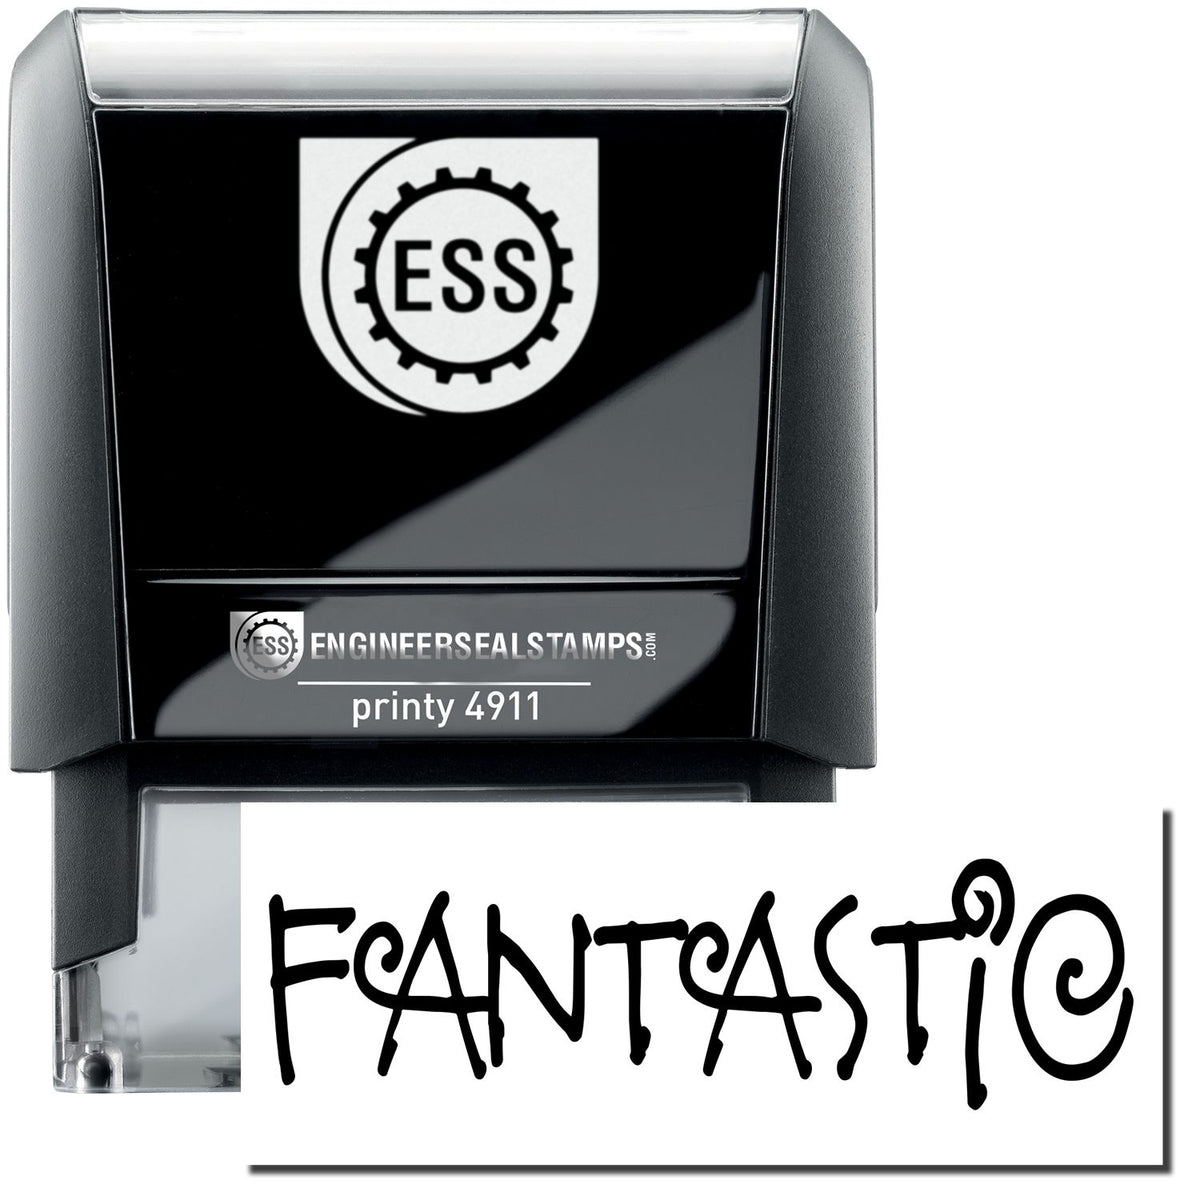 A self-inking stamp with a stamped image showing how the text &quot;FANTASTIC&quot; is displayed after stamping.